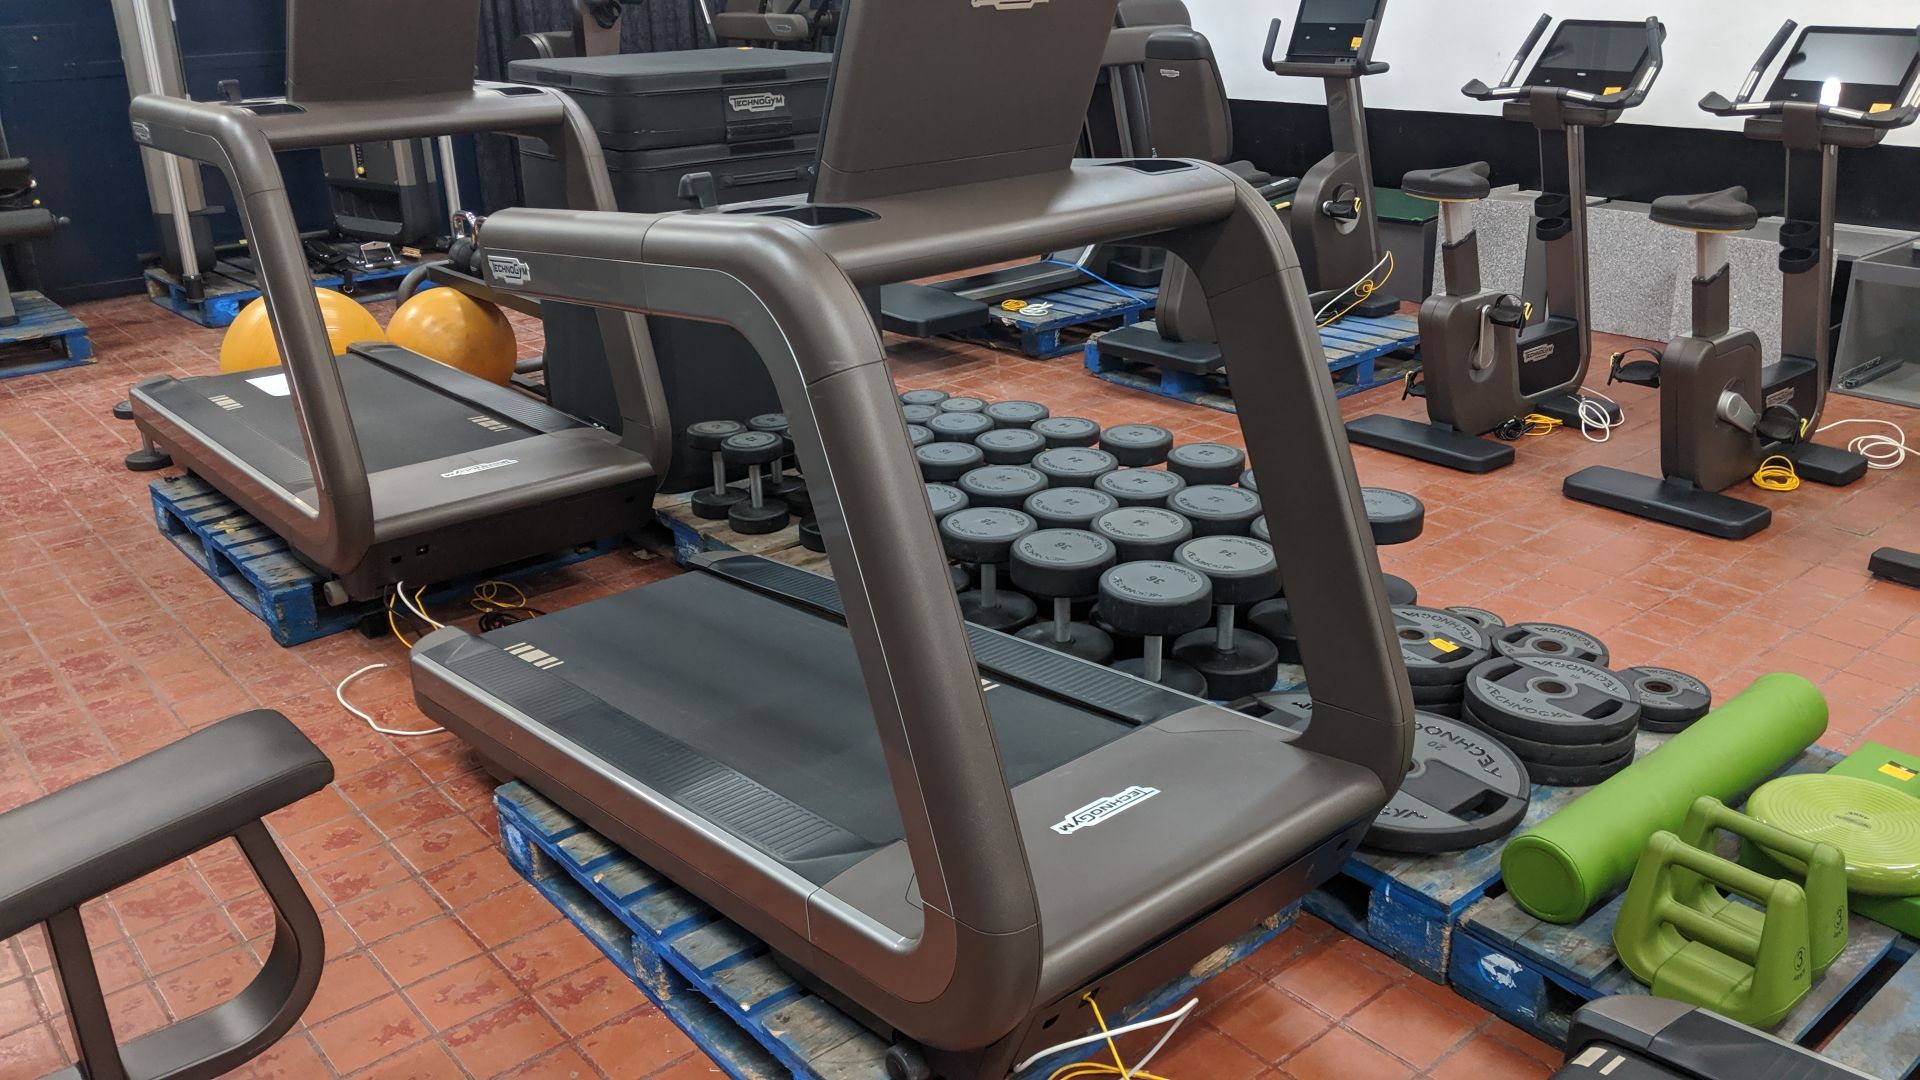 Technogym Artis treadmill Purchased new in 2016 - refurbished/recommissioned by Technogym - please - Image 10 of 13